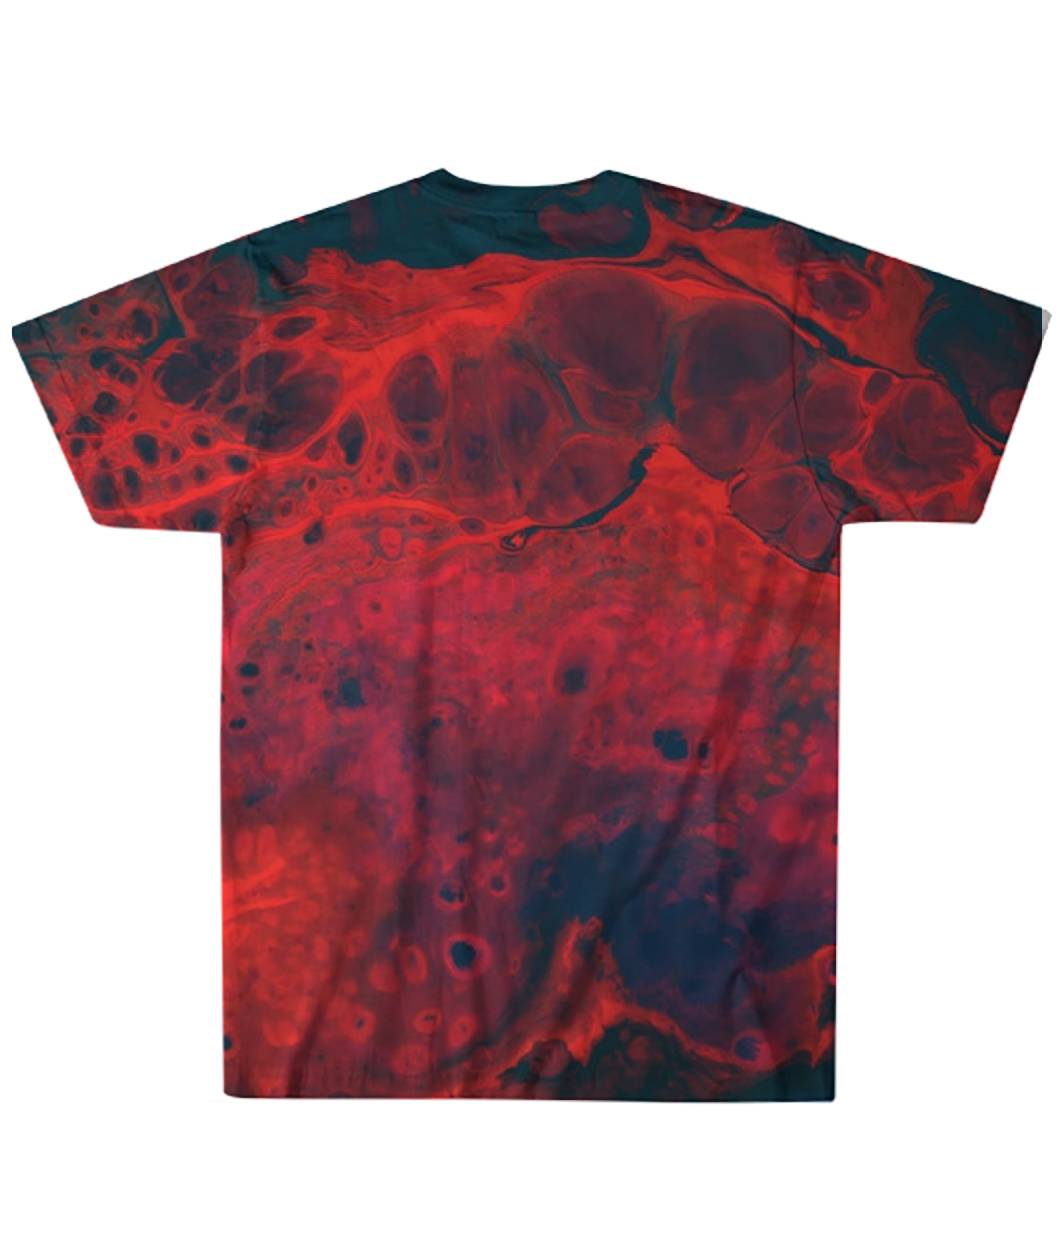 Abstract Cell t-shirt